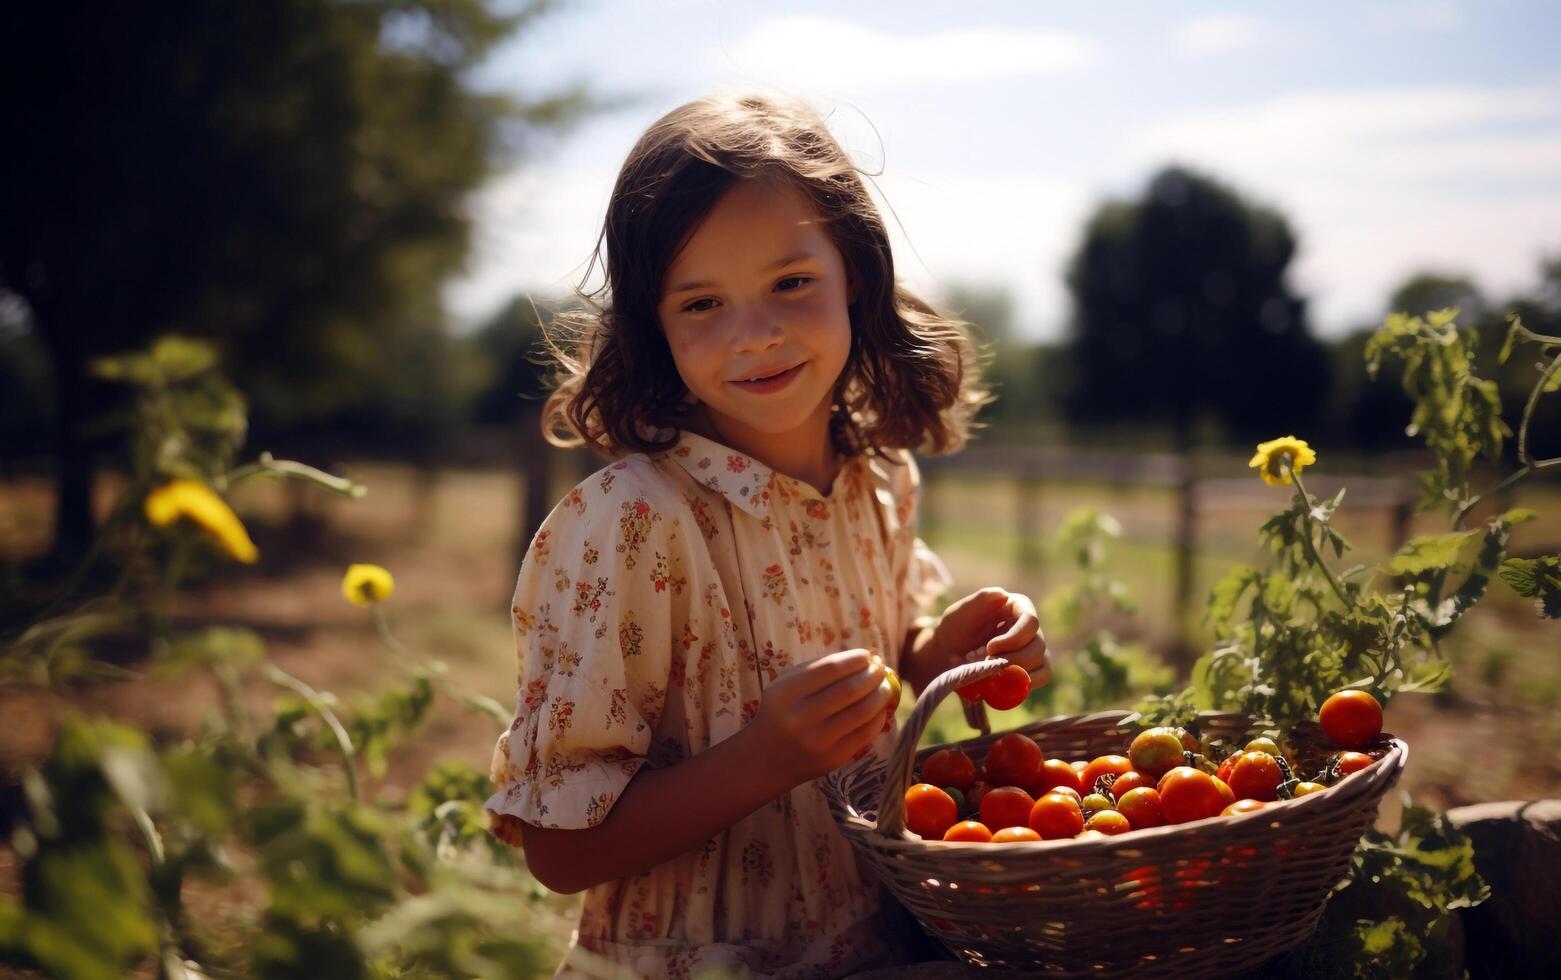 Tomato Joy 8 Year Old Girl Relishing Fresh Harvest in the Countryside photo